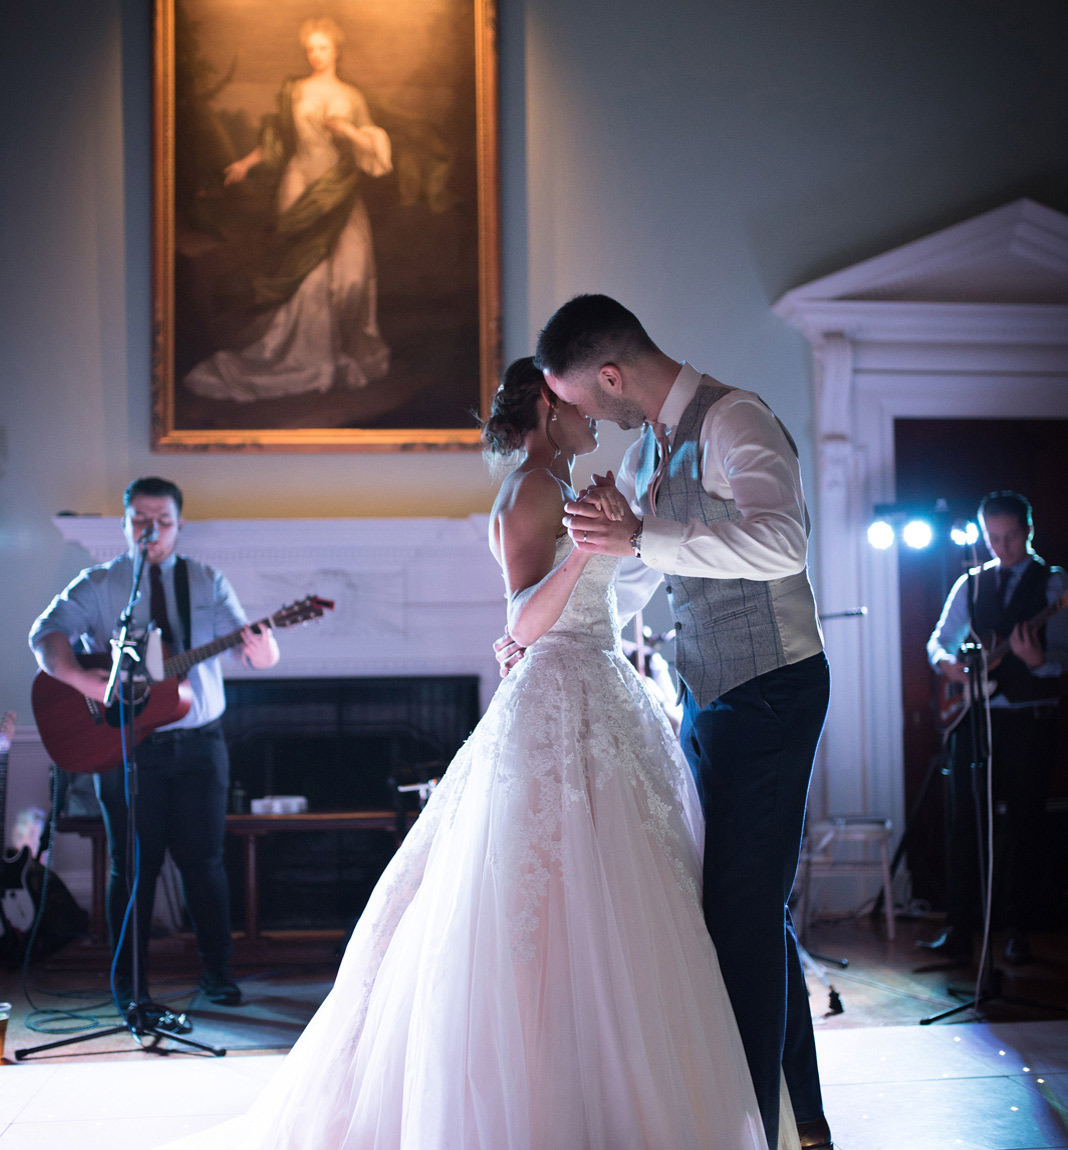 Wedding couple evening reception at Kirtlington Park country house in Oxfordshire